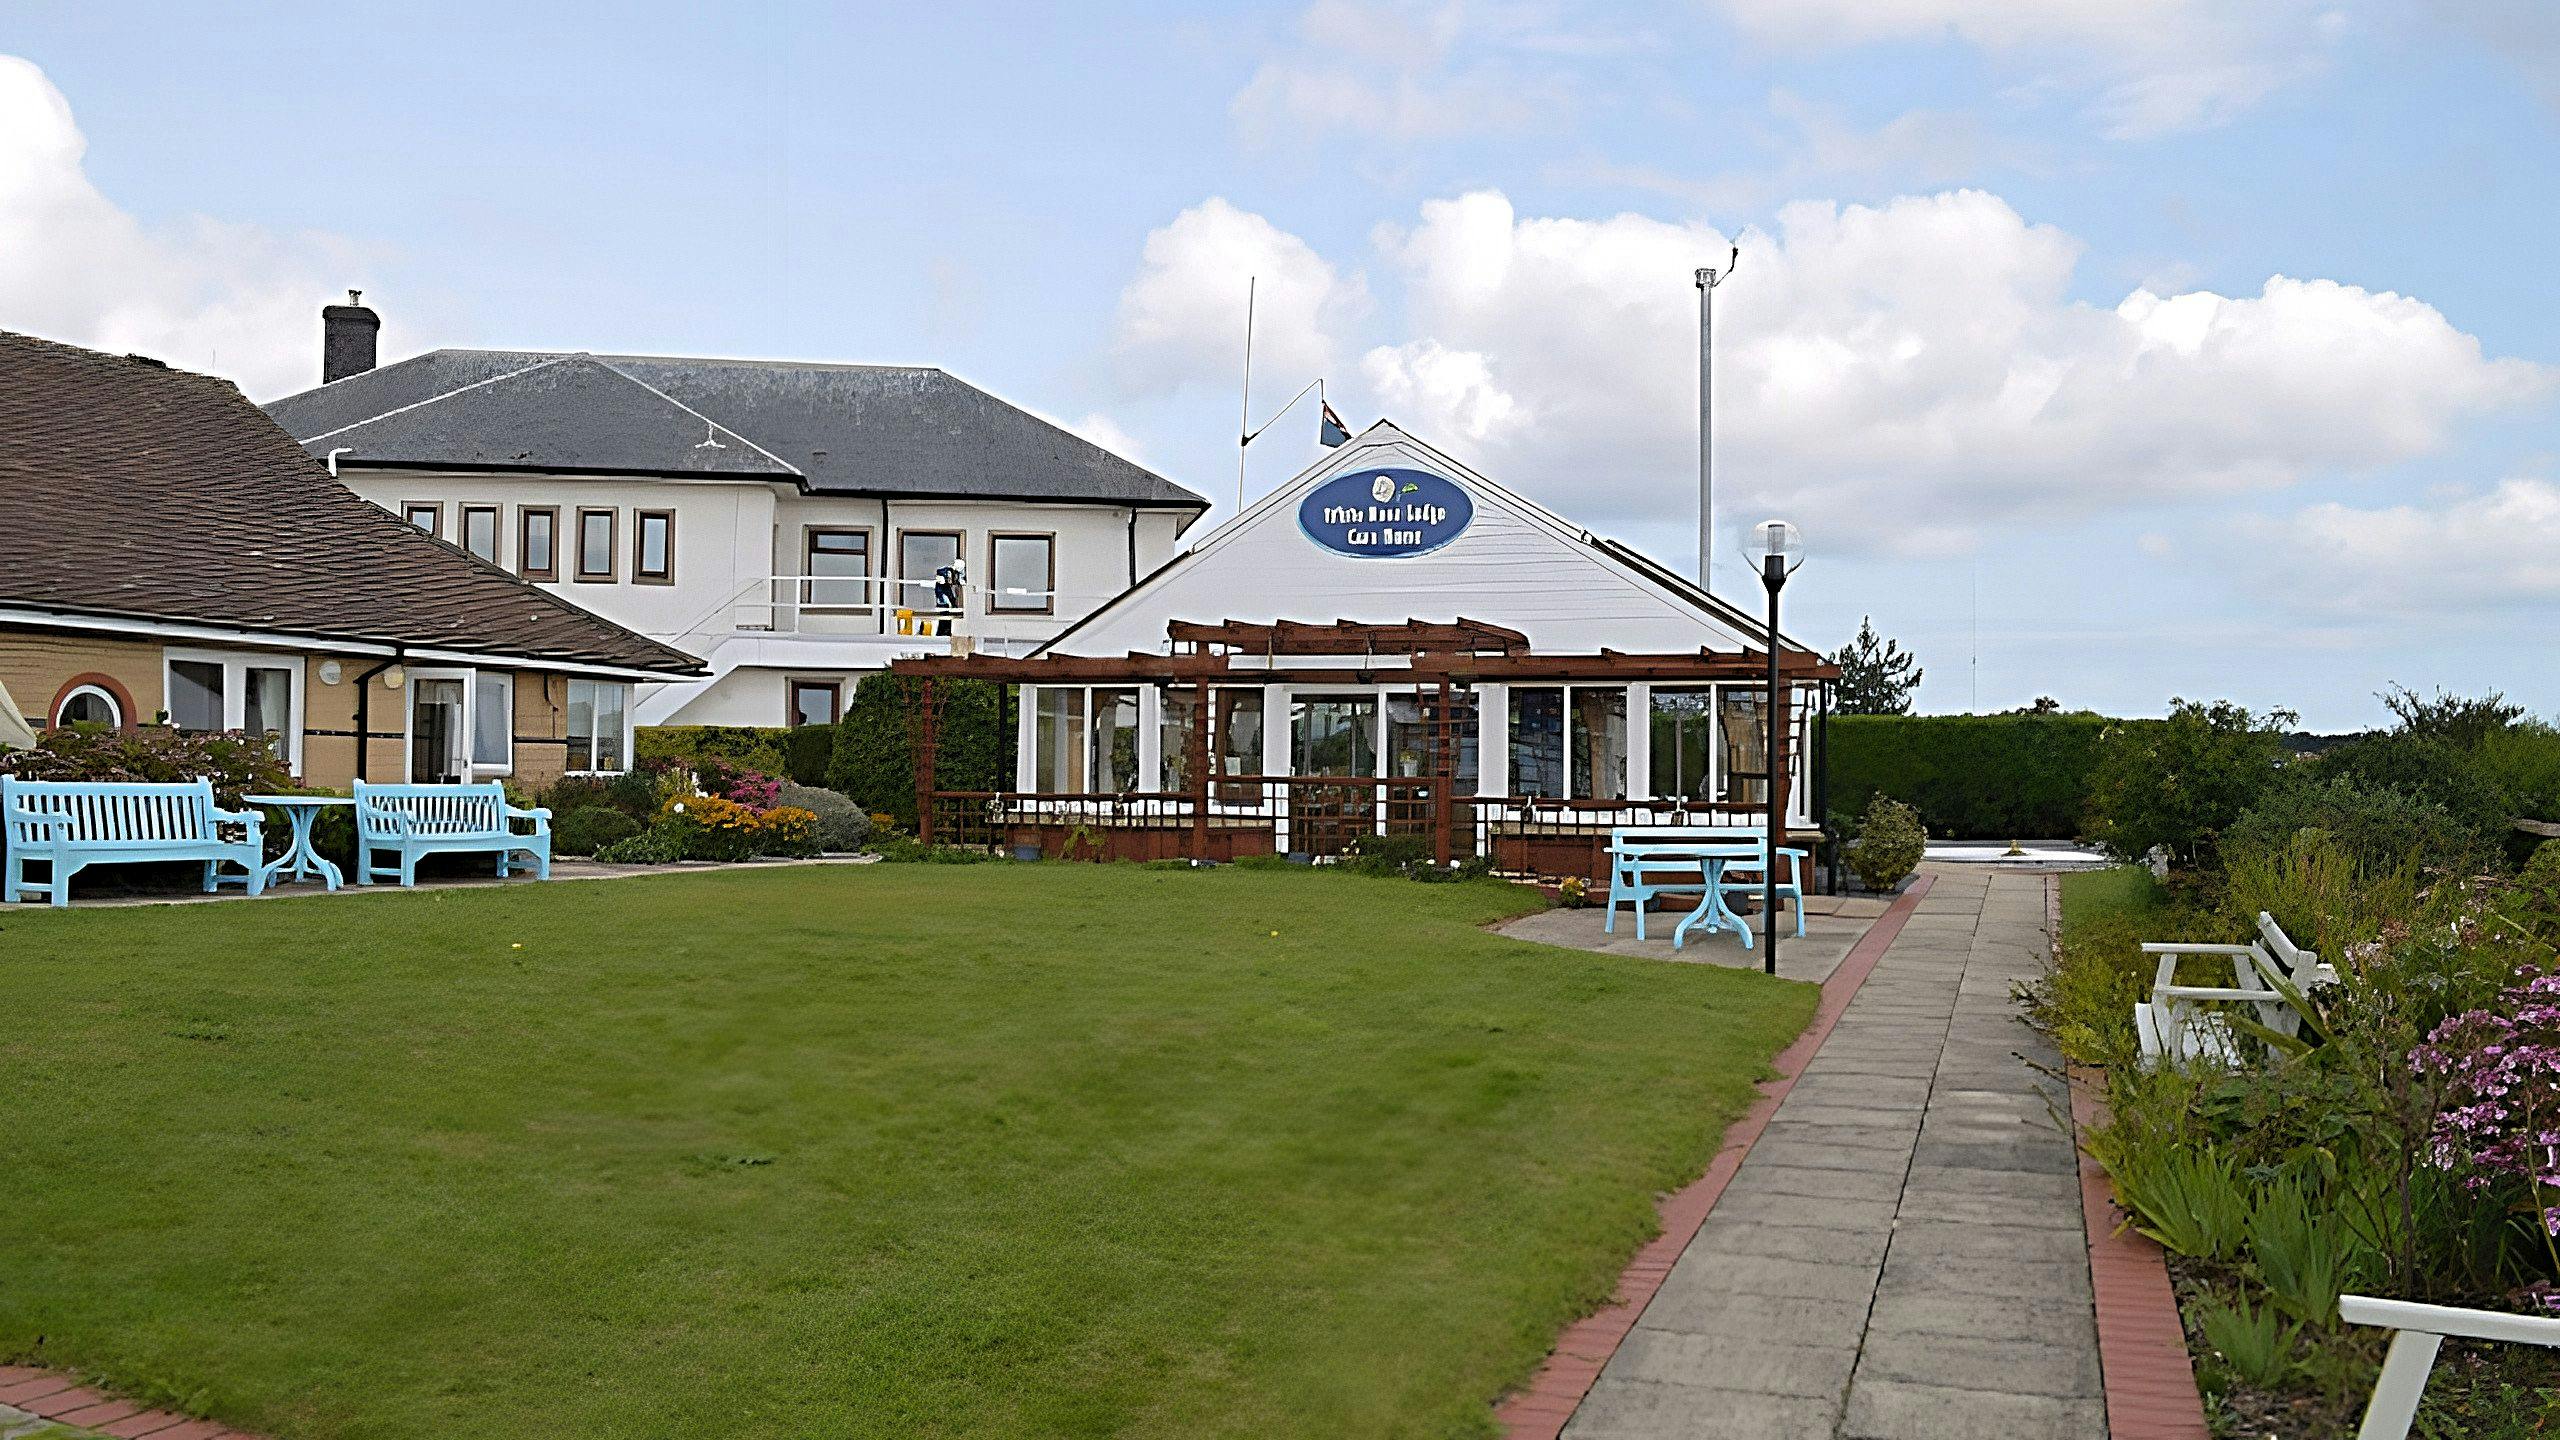 Countrywide - White Rose Lodge care home 3